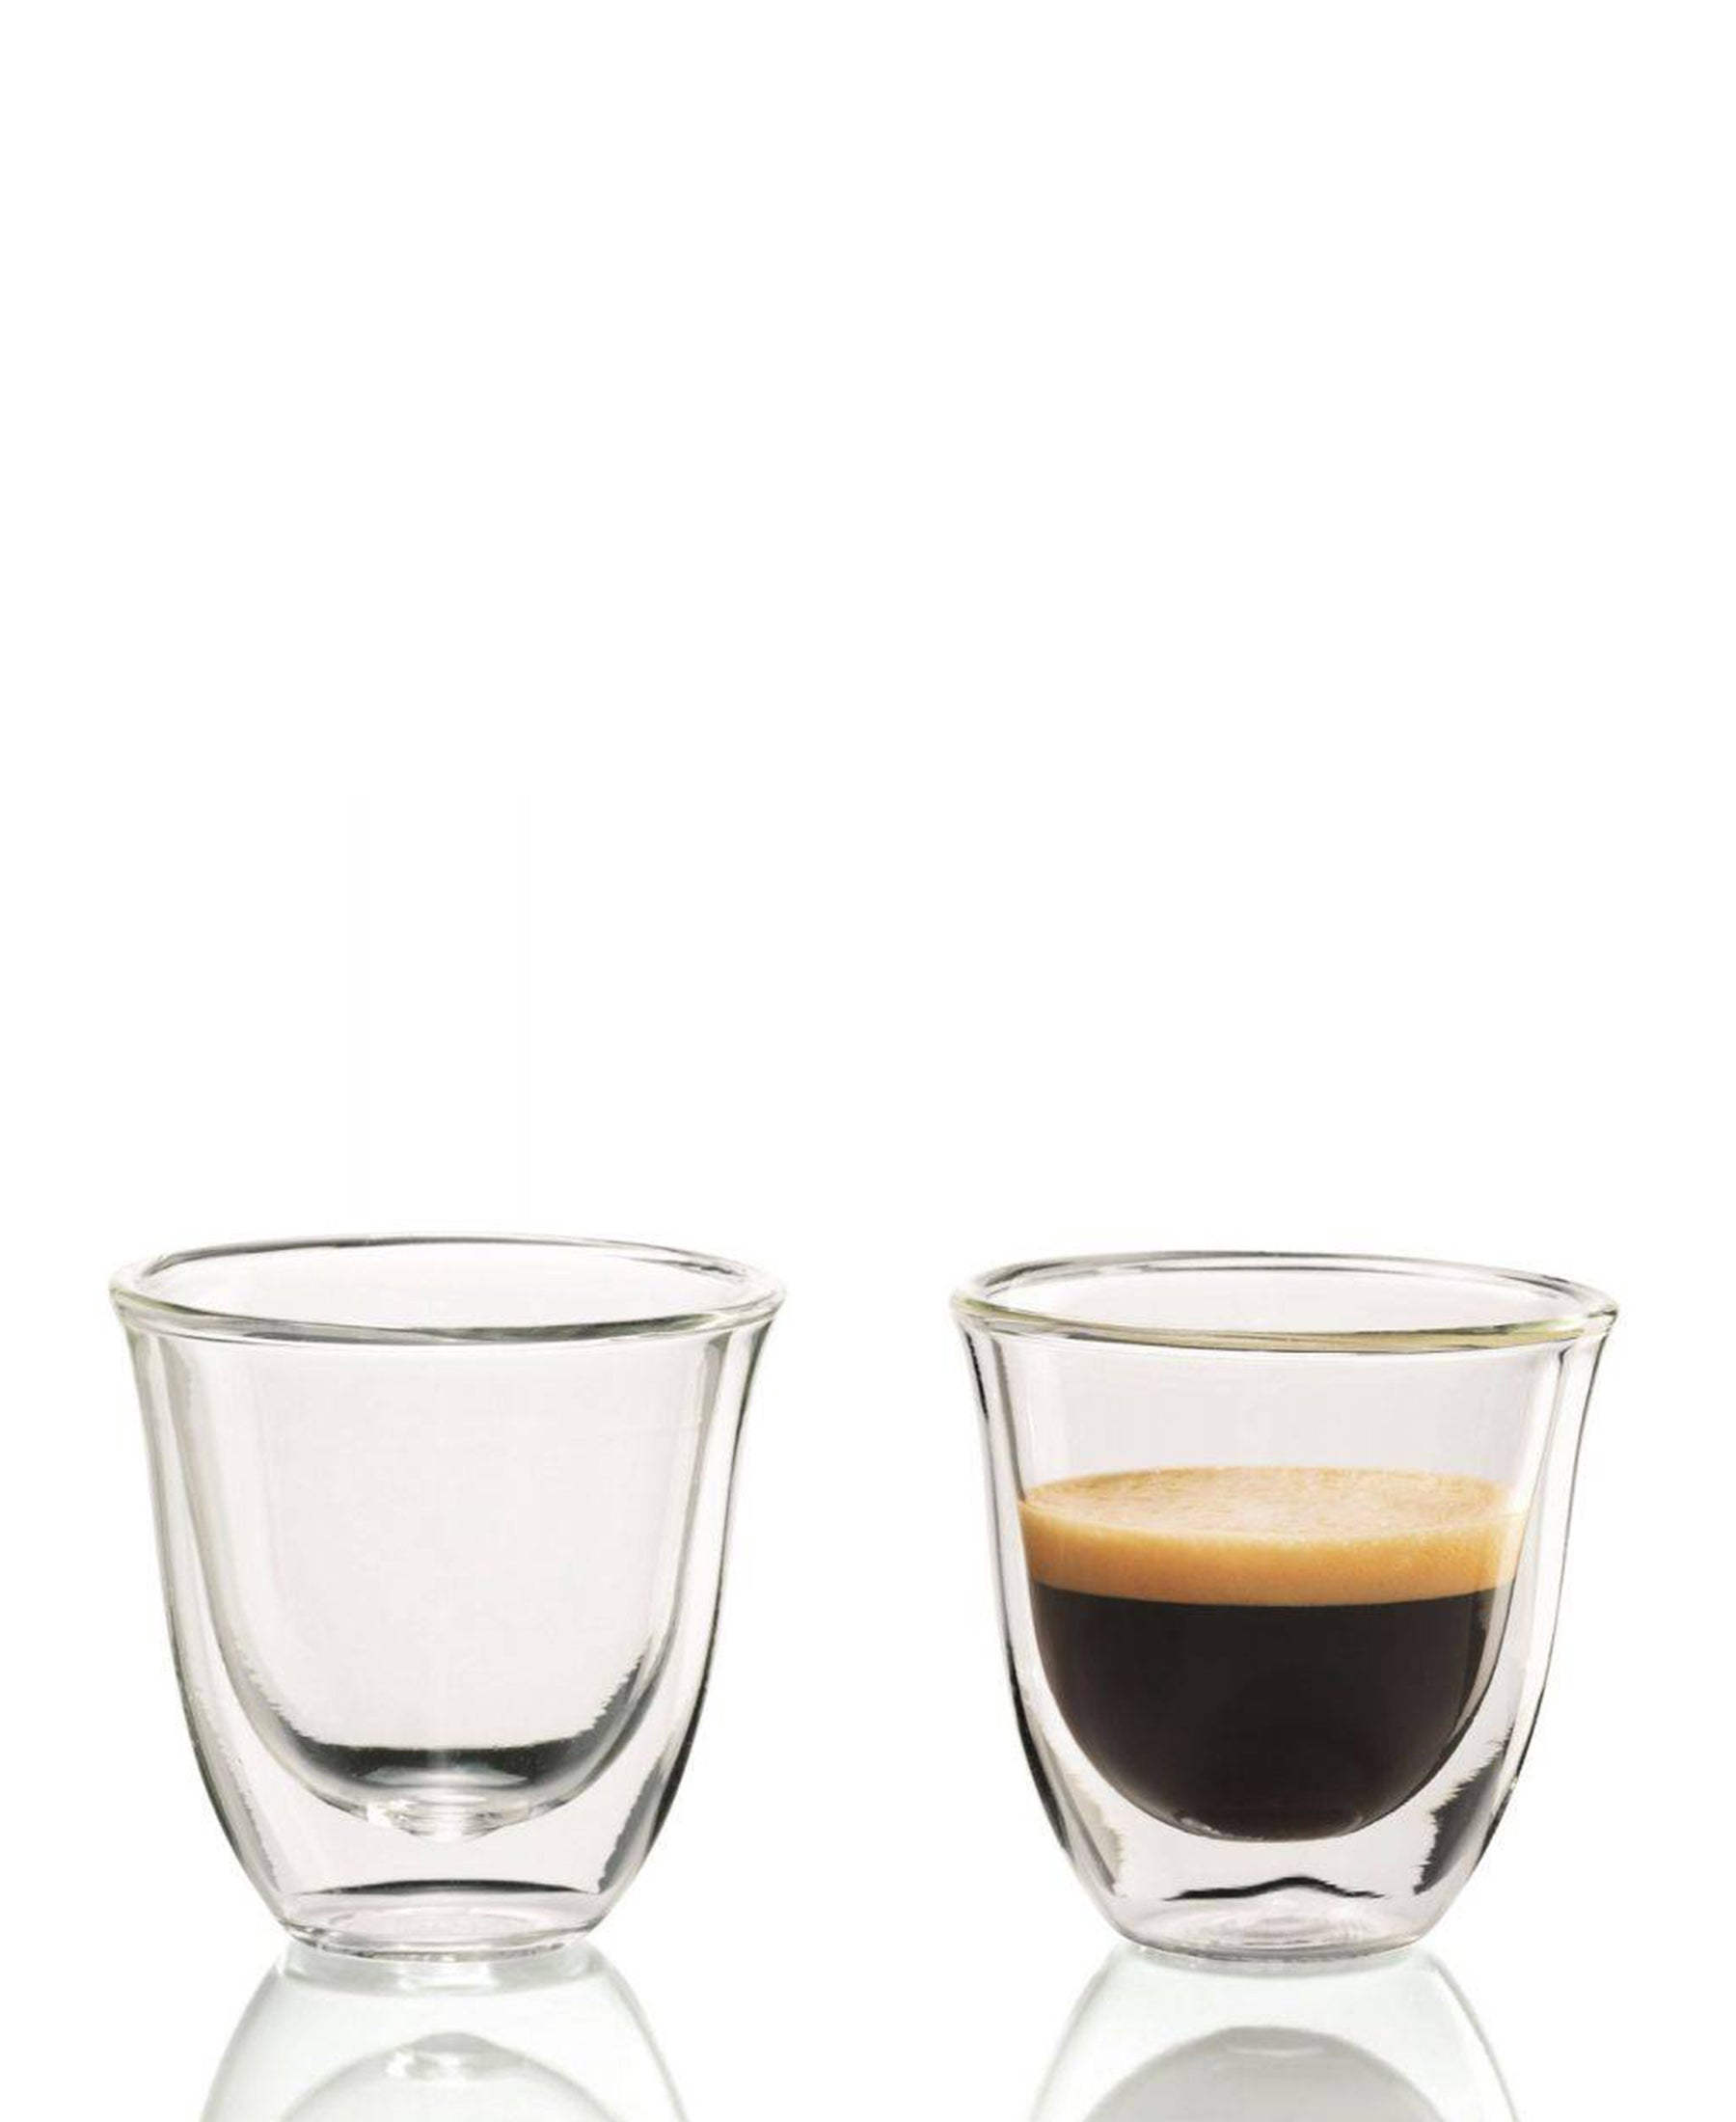 DeLonghi Double Walled Thermo Espresso Glass 2 Piece - Clear